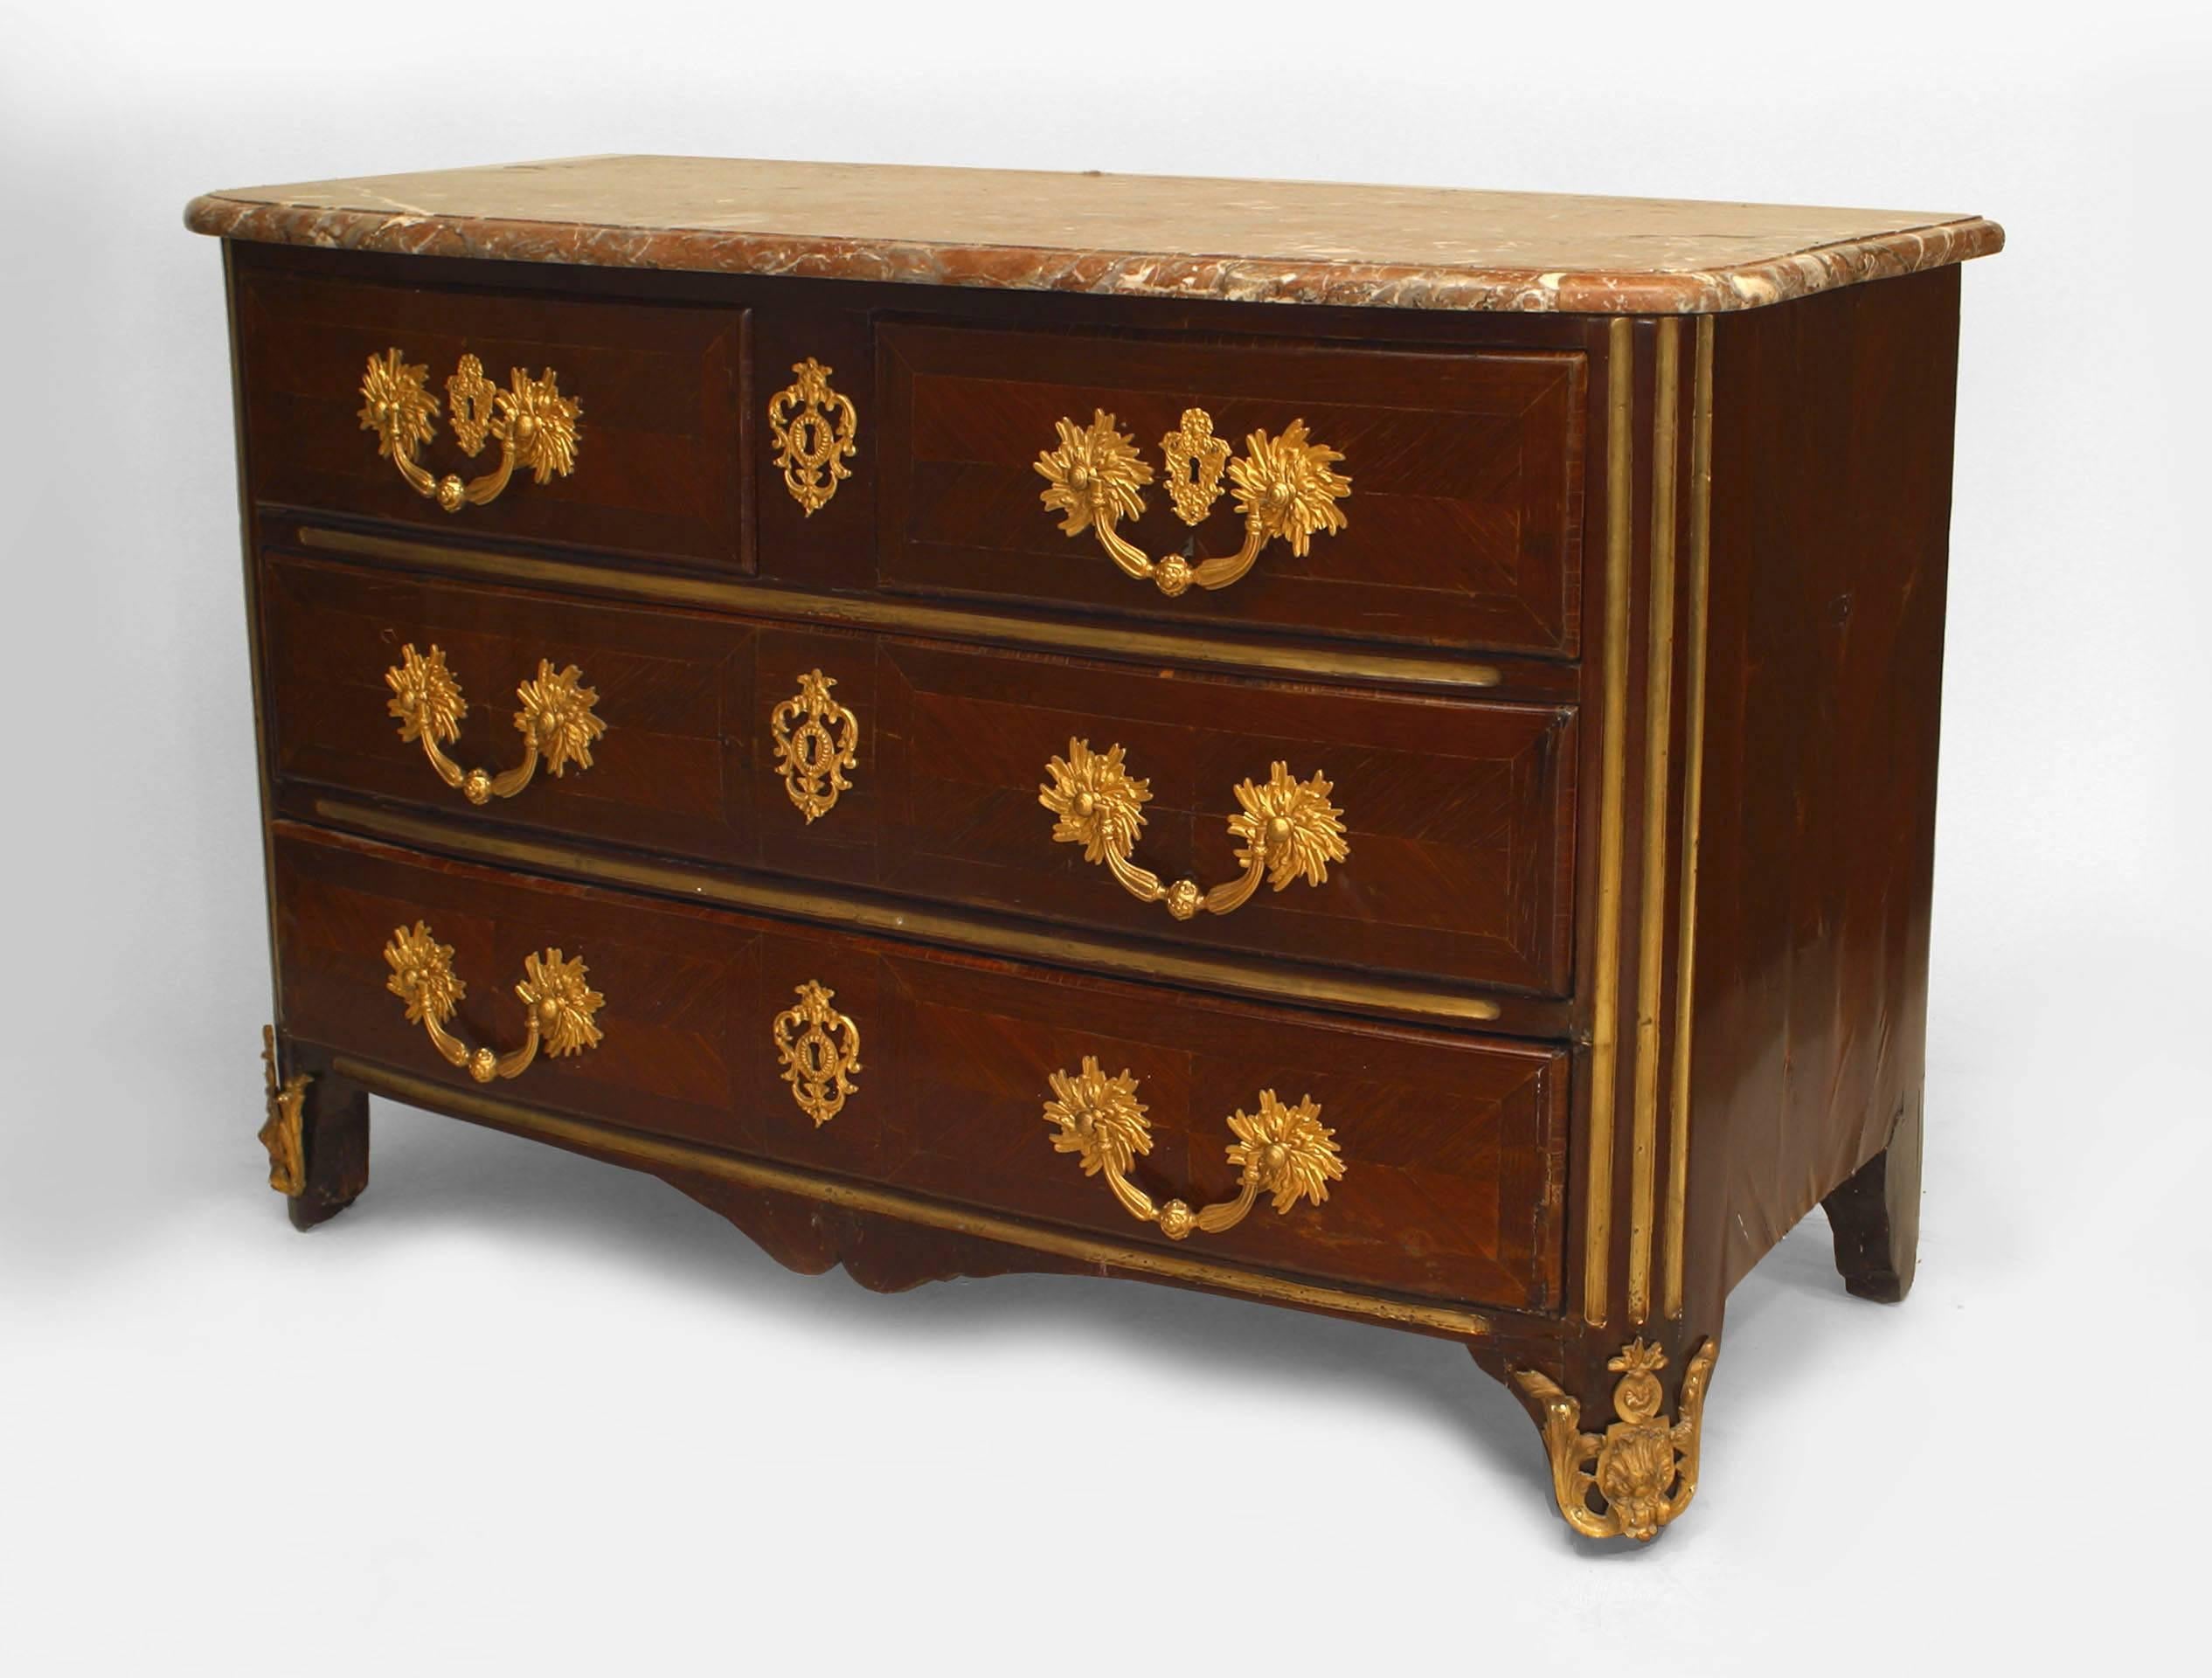 French Louis XVI (18th Century) mahogany veneered chest with 2 large drawers under a Pair of drawers embellished with bronze mounts & brass fluted trim with a brown marble top.
